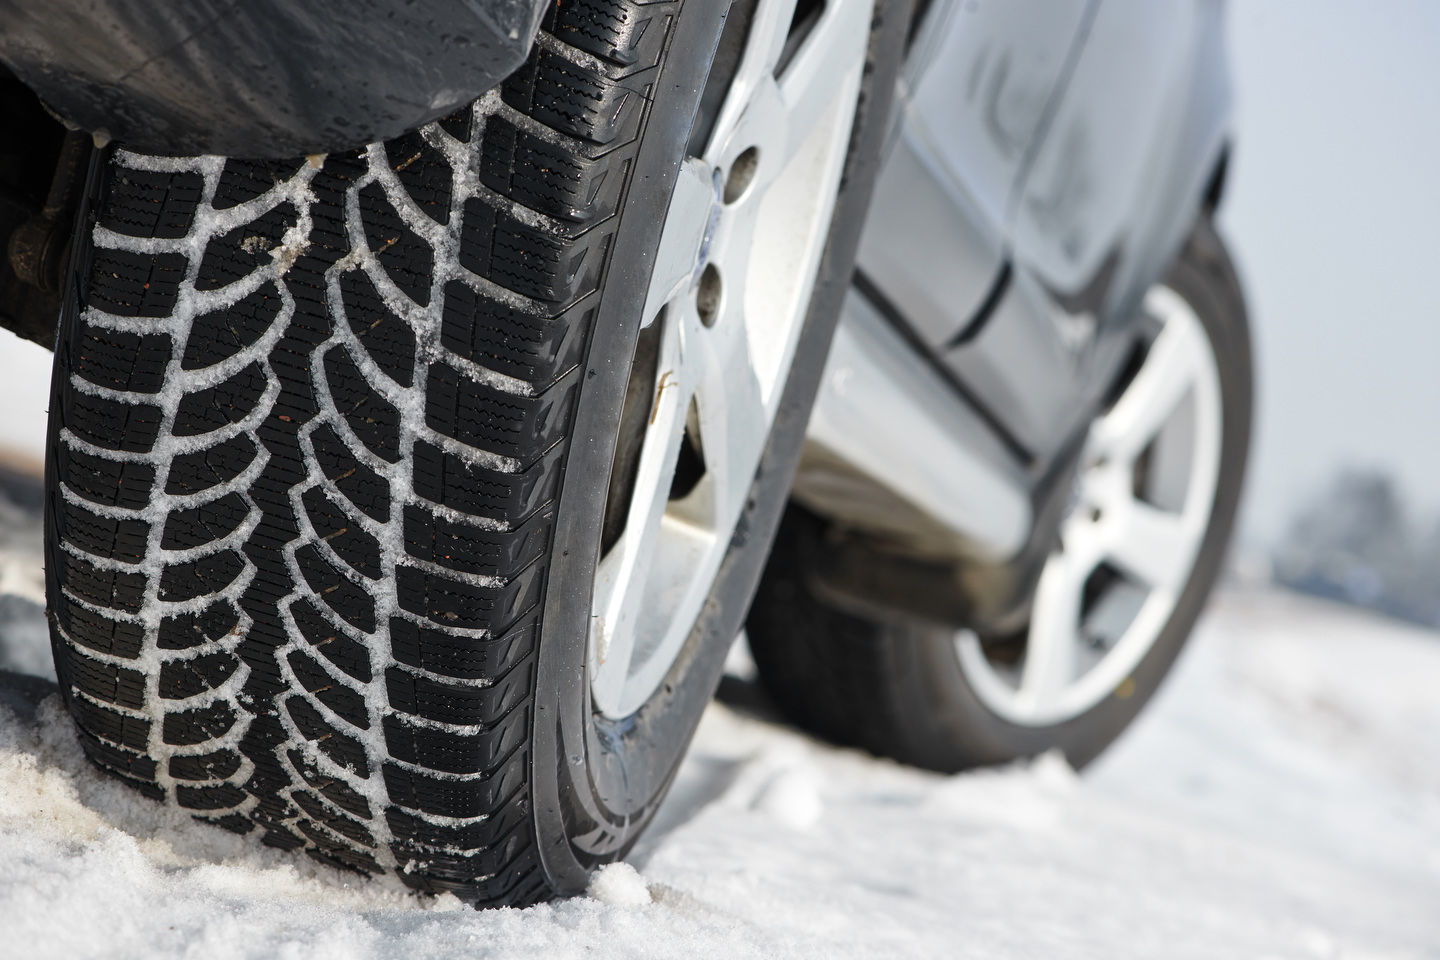 Frequently asked questions about Mazda winter tires